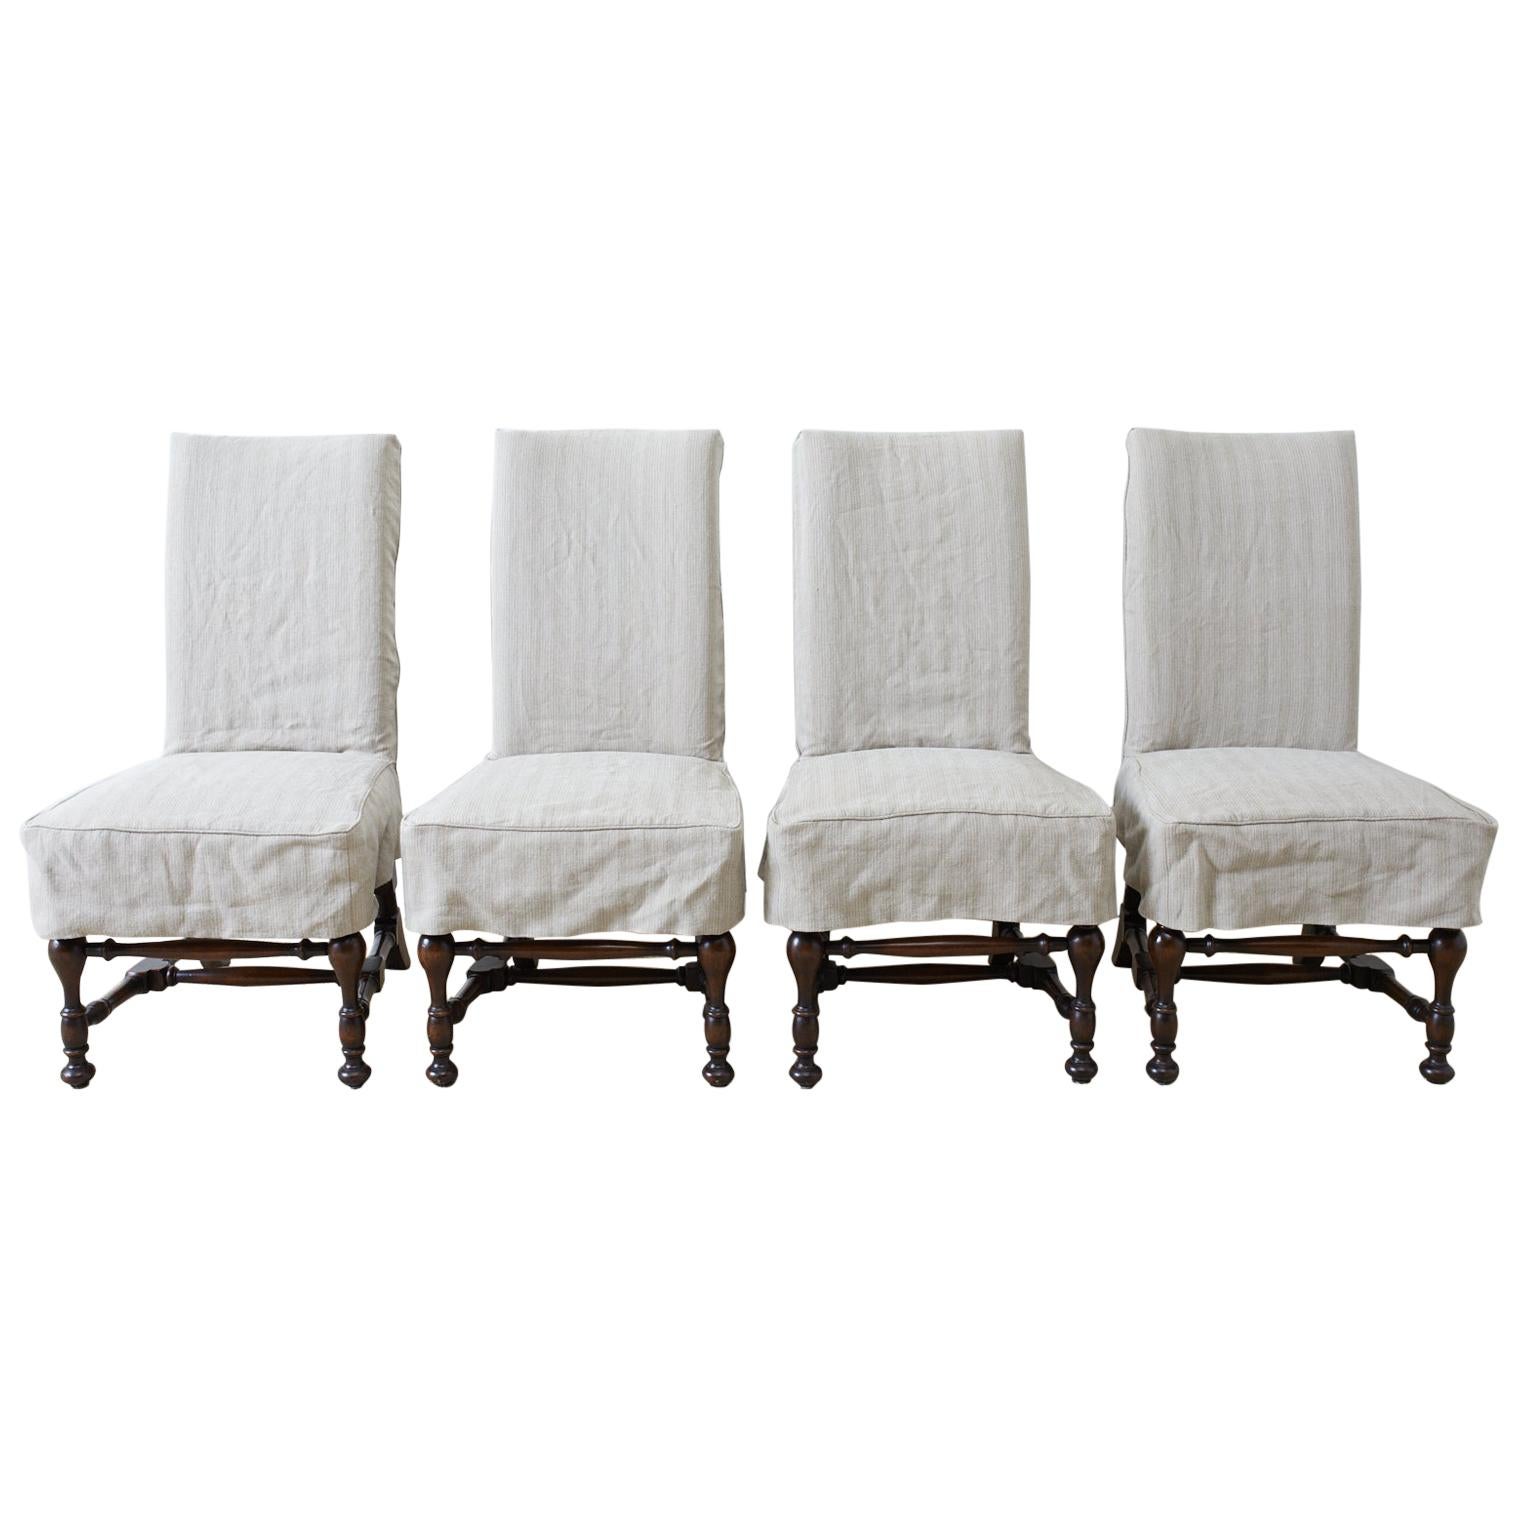 Set of Four English Style Walnut Slipcover Dining Chairs